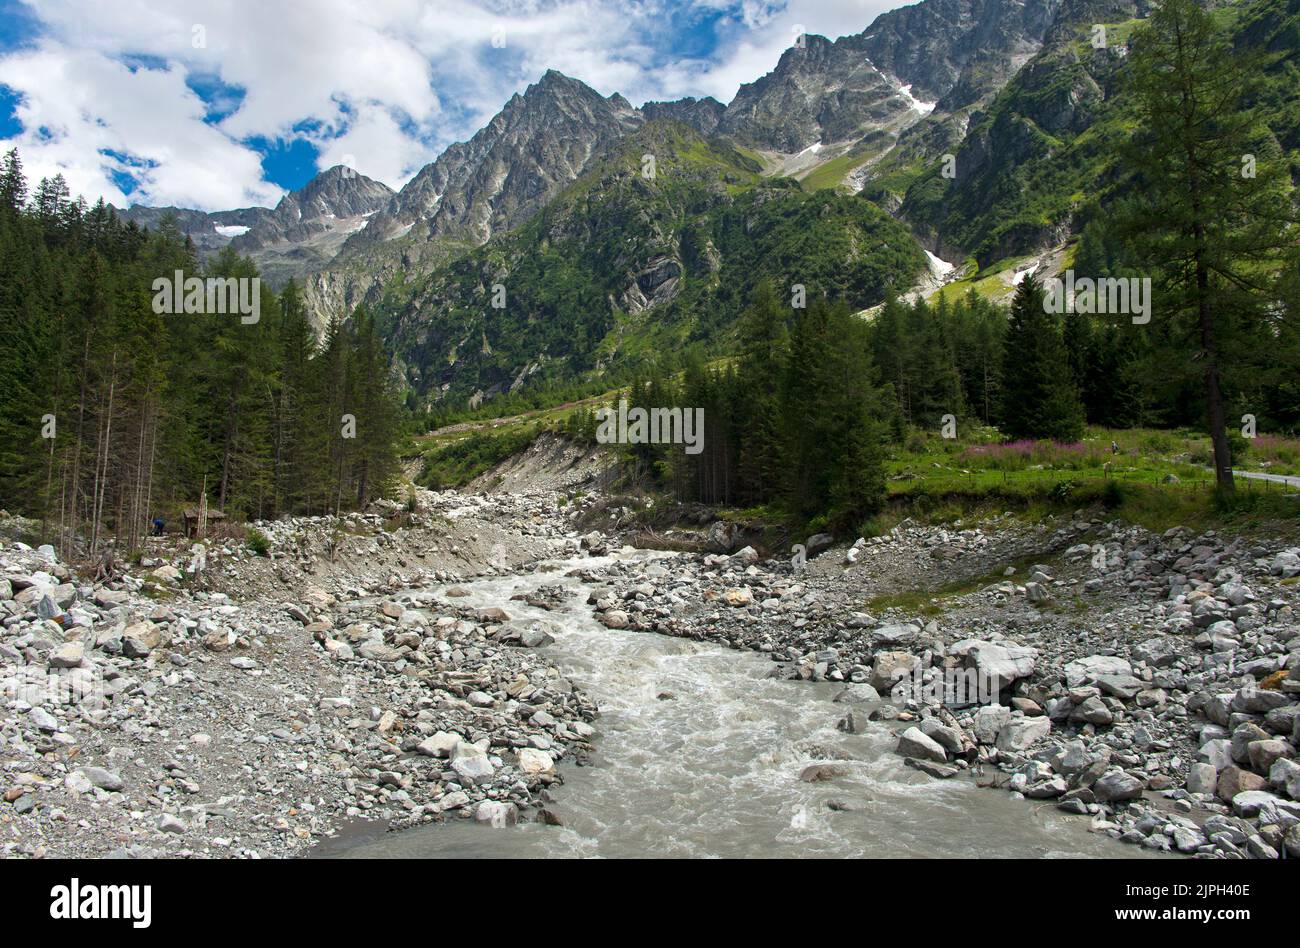 The Kander torrent with scree-strewn banks in the Gastern Valley, Kandersteg, Bernese Oberland, Canton of Bern, Switzerland Stock Photo